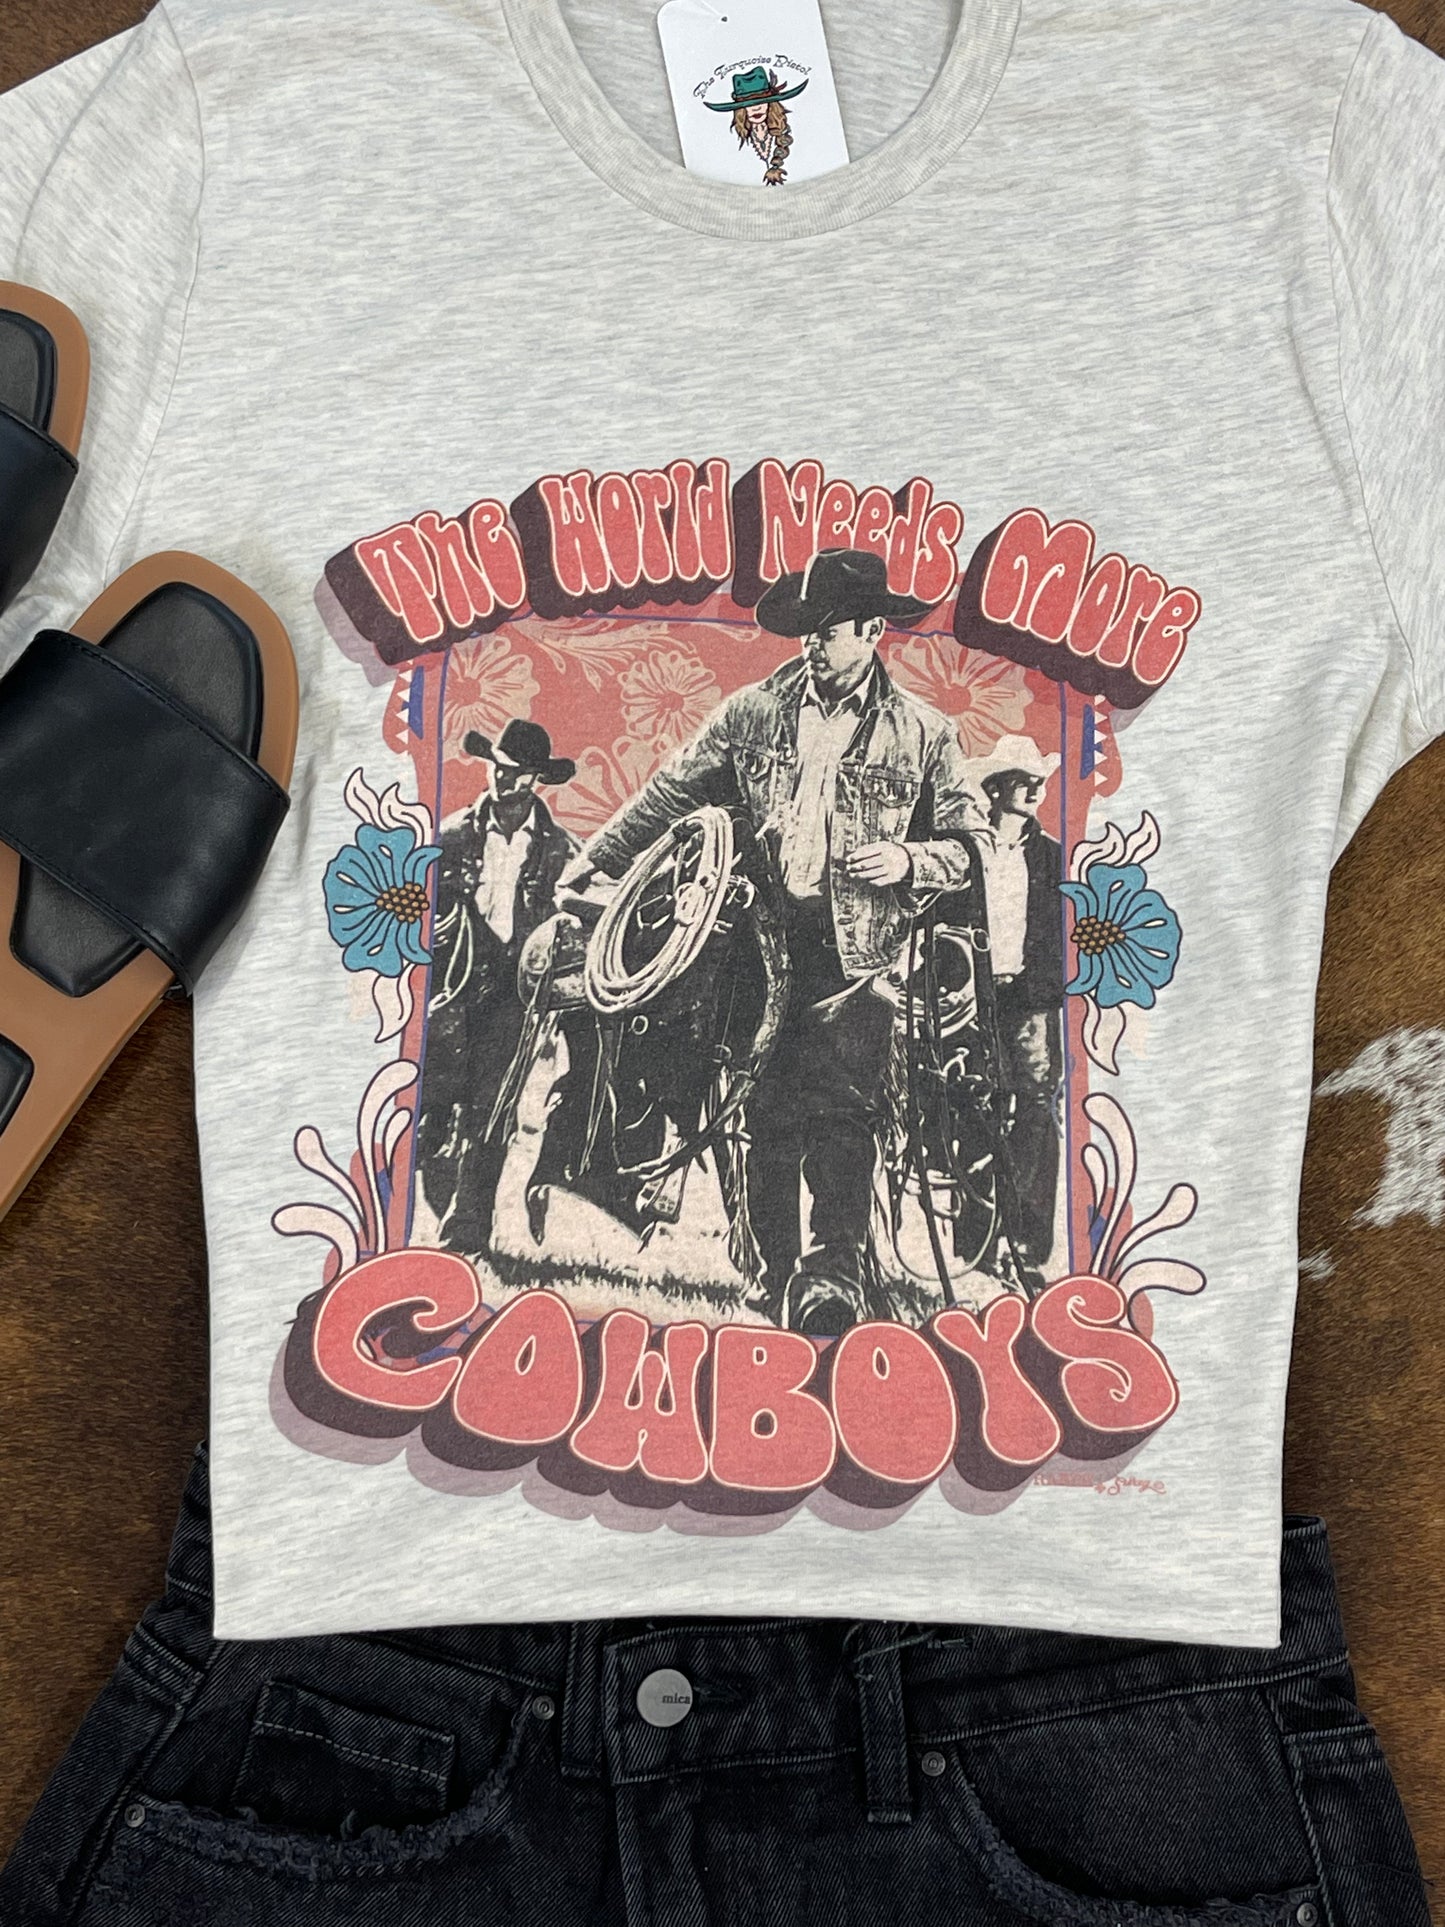 The World Needs More Cowboys Graphic Tee